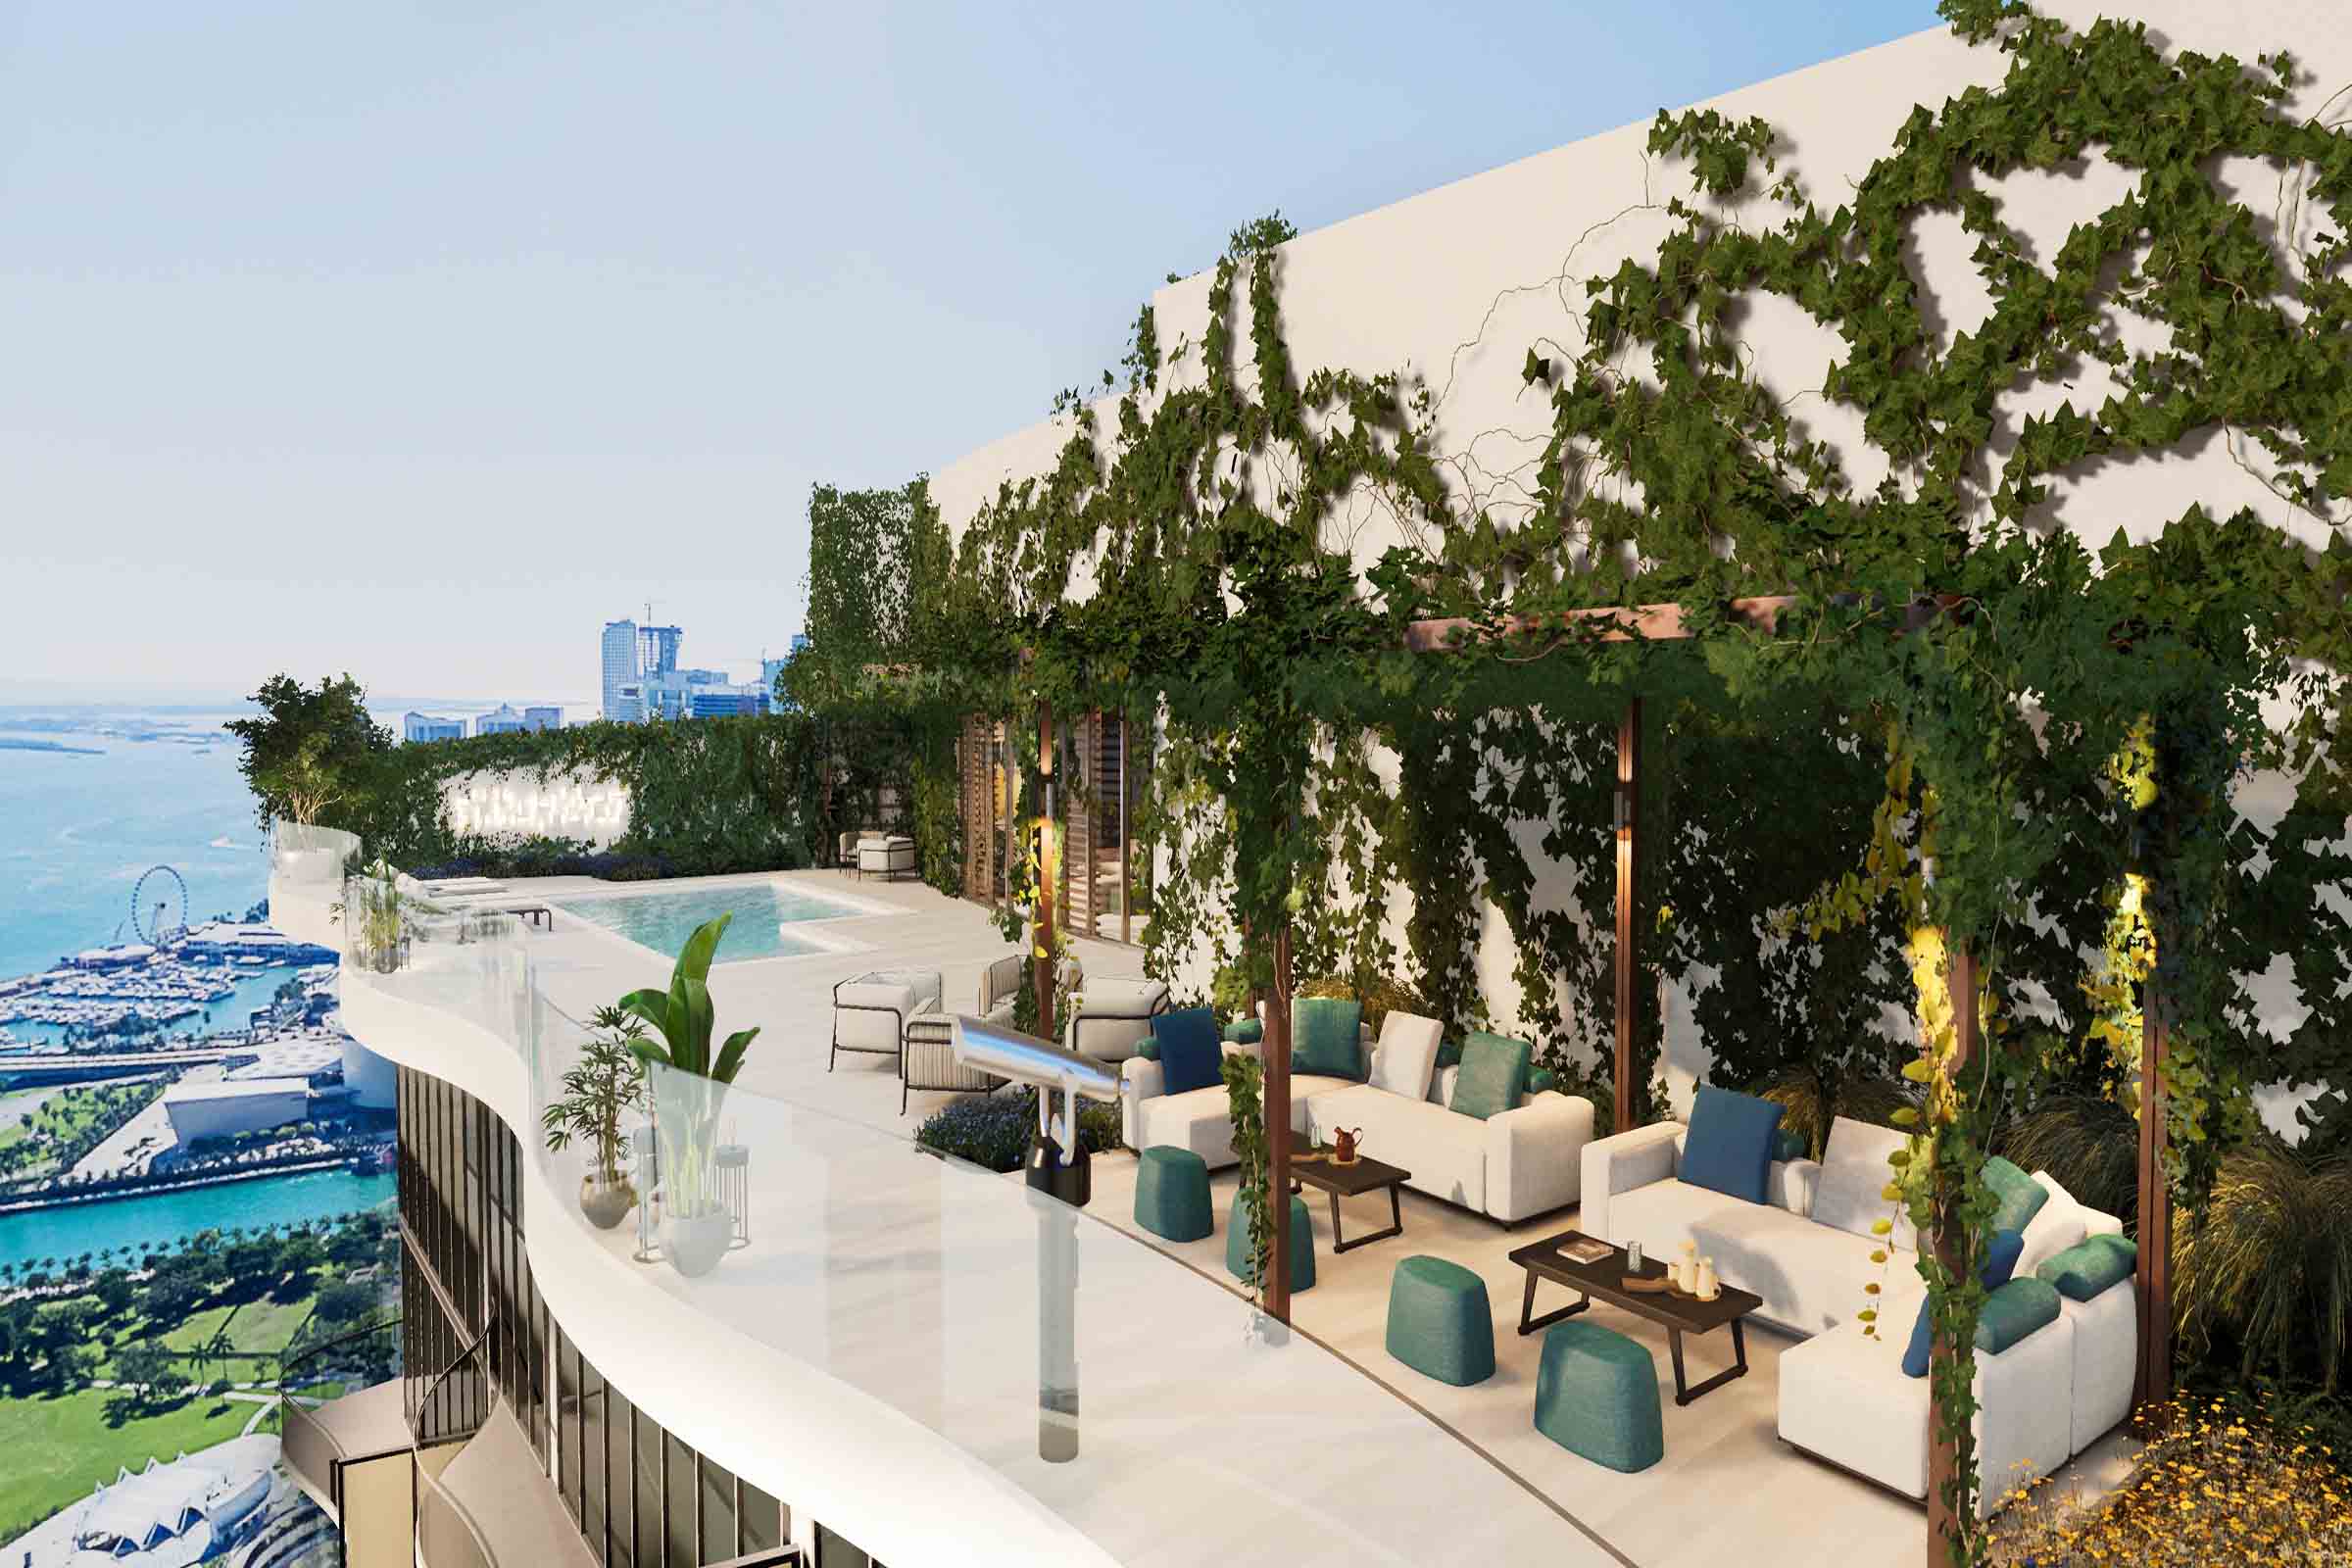 Casa Bella By B&B Italia: Upper Penthouses To Offer Rooftop Terraces And Private Pools